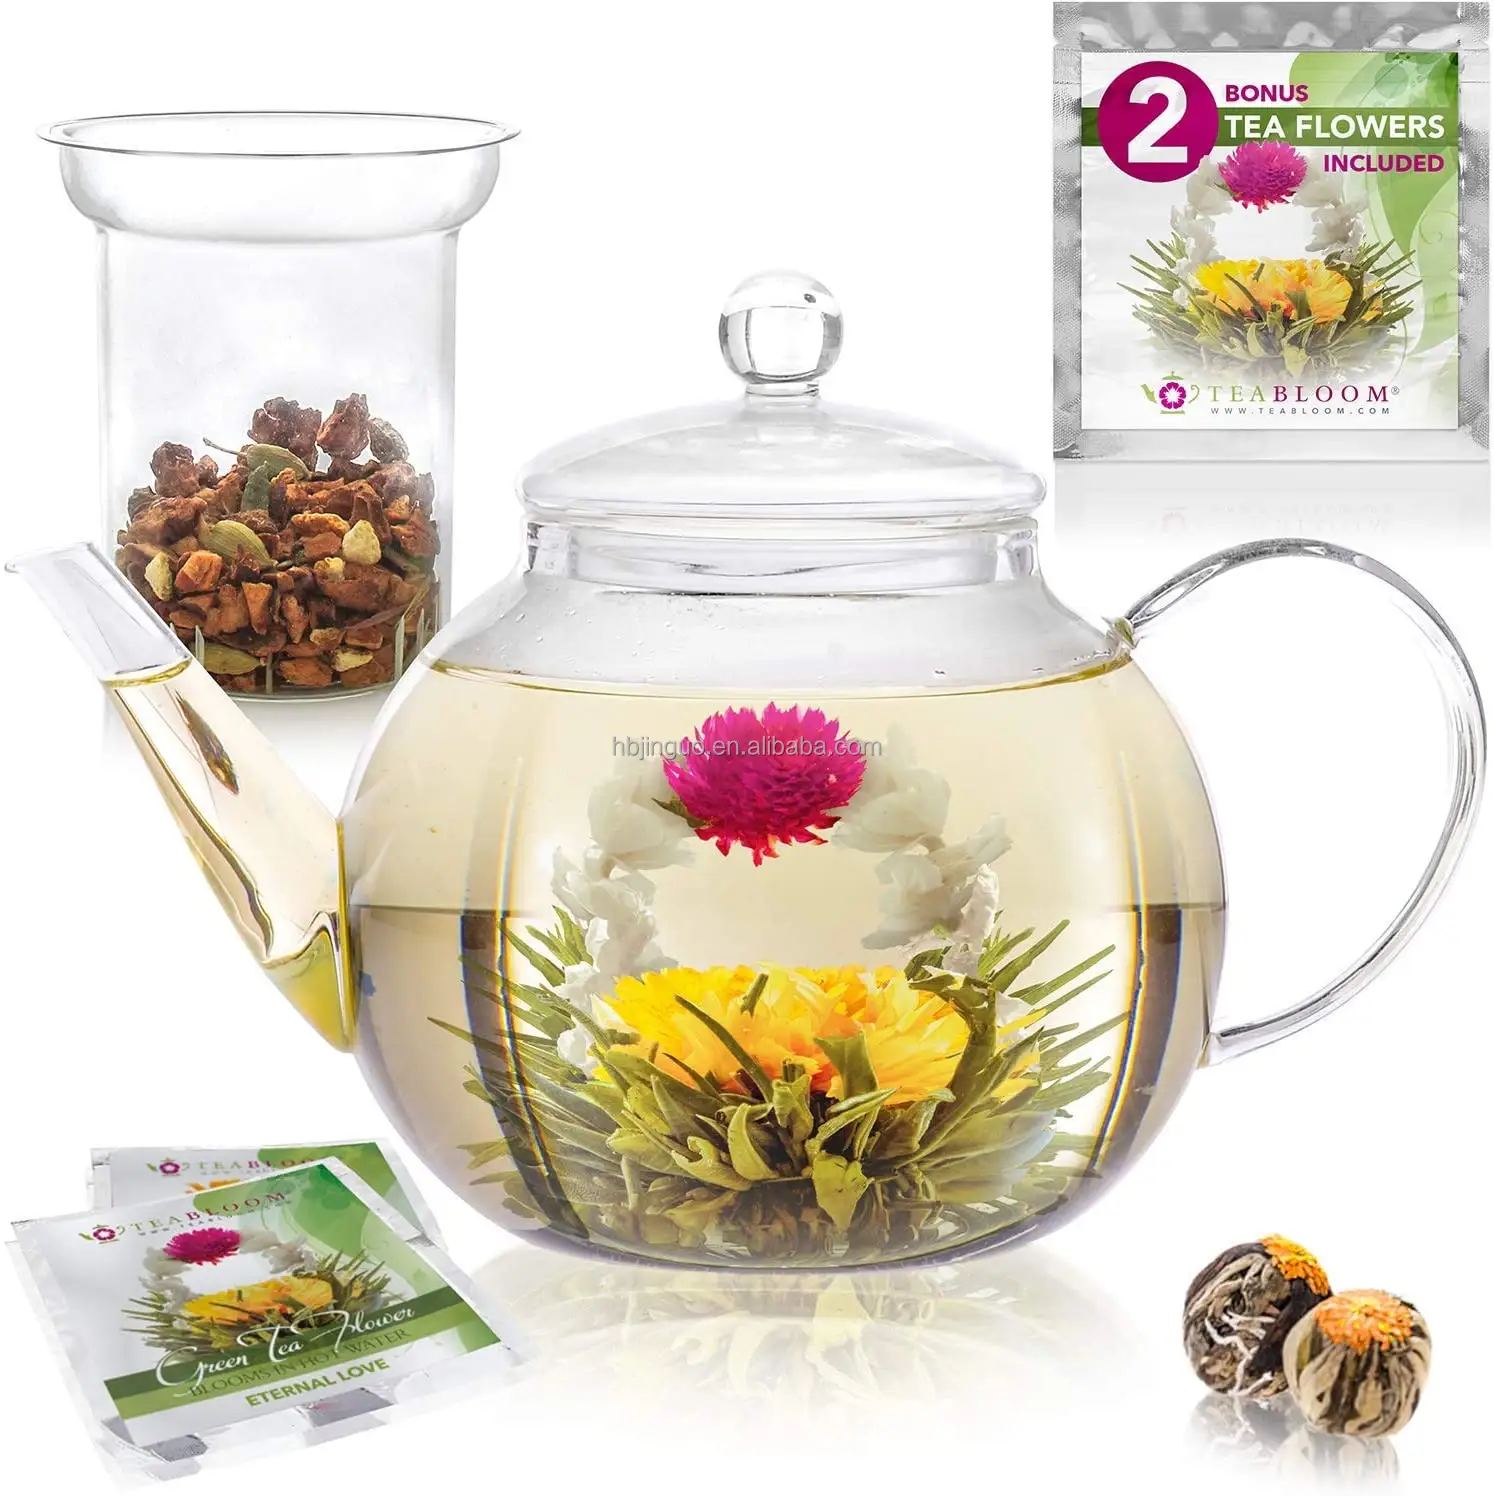 Chinese Organic Flower Beautiful Detox Handmade Healthy Artistic Fruit Blooming Flower Tea Balls With Dried Flower and Green Tea